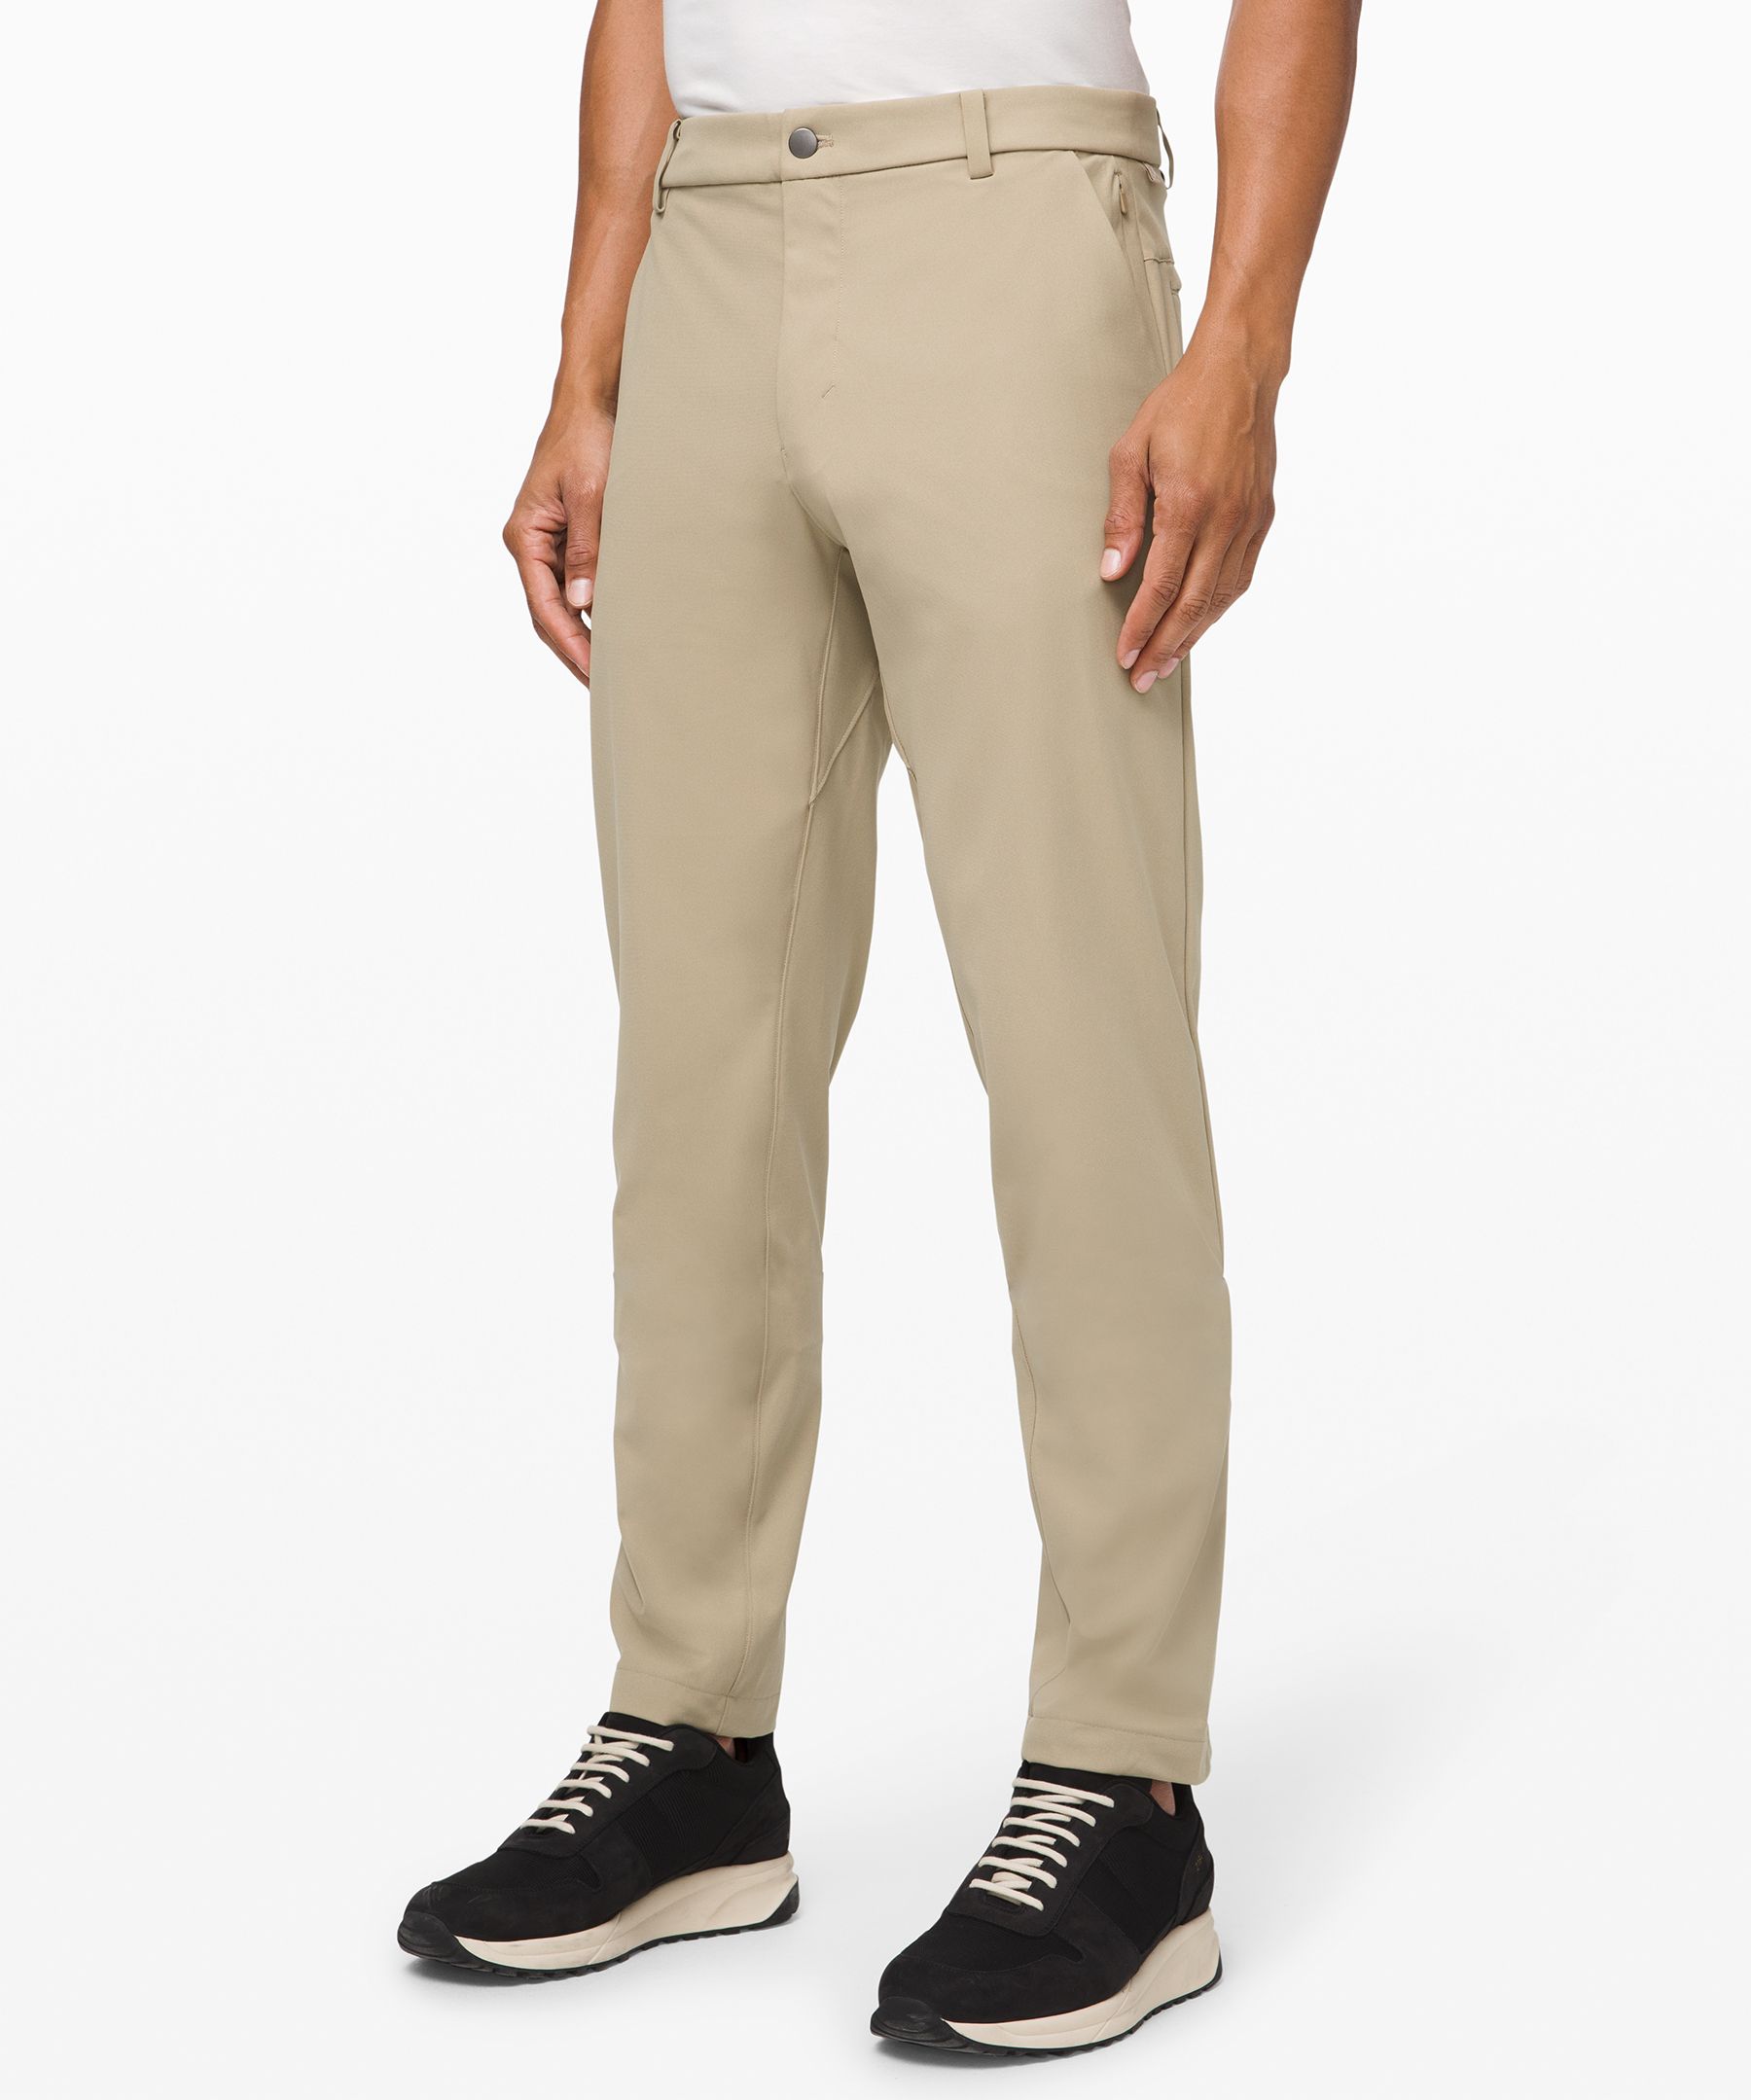 Lululemon Commission Pant Classic 30" *warpstreme Online Only In Khaki